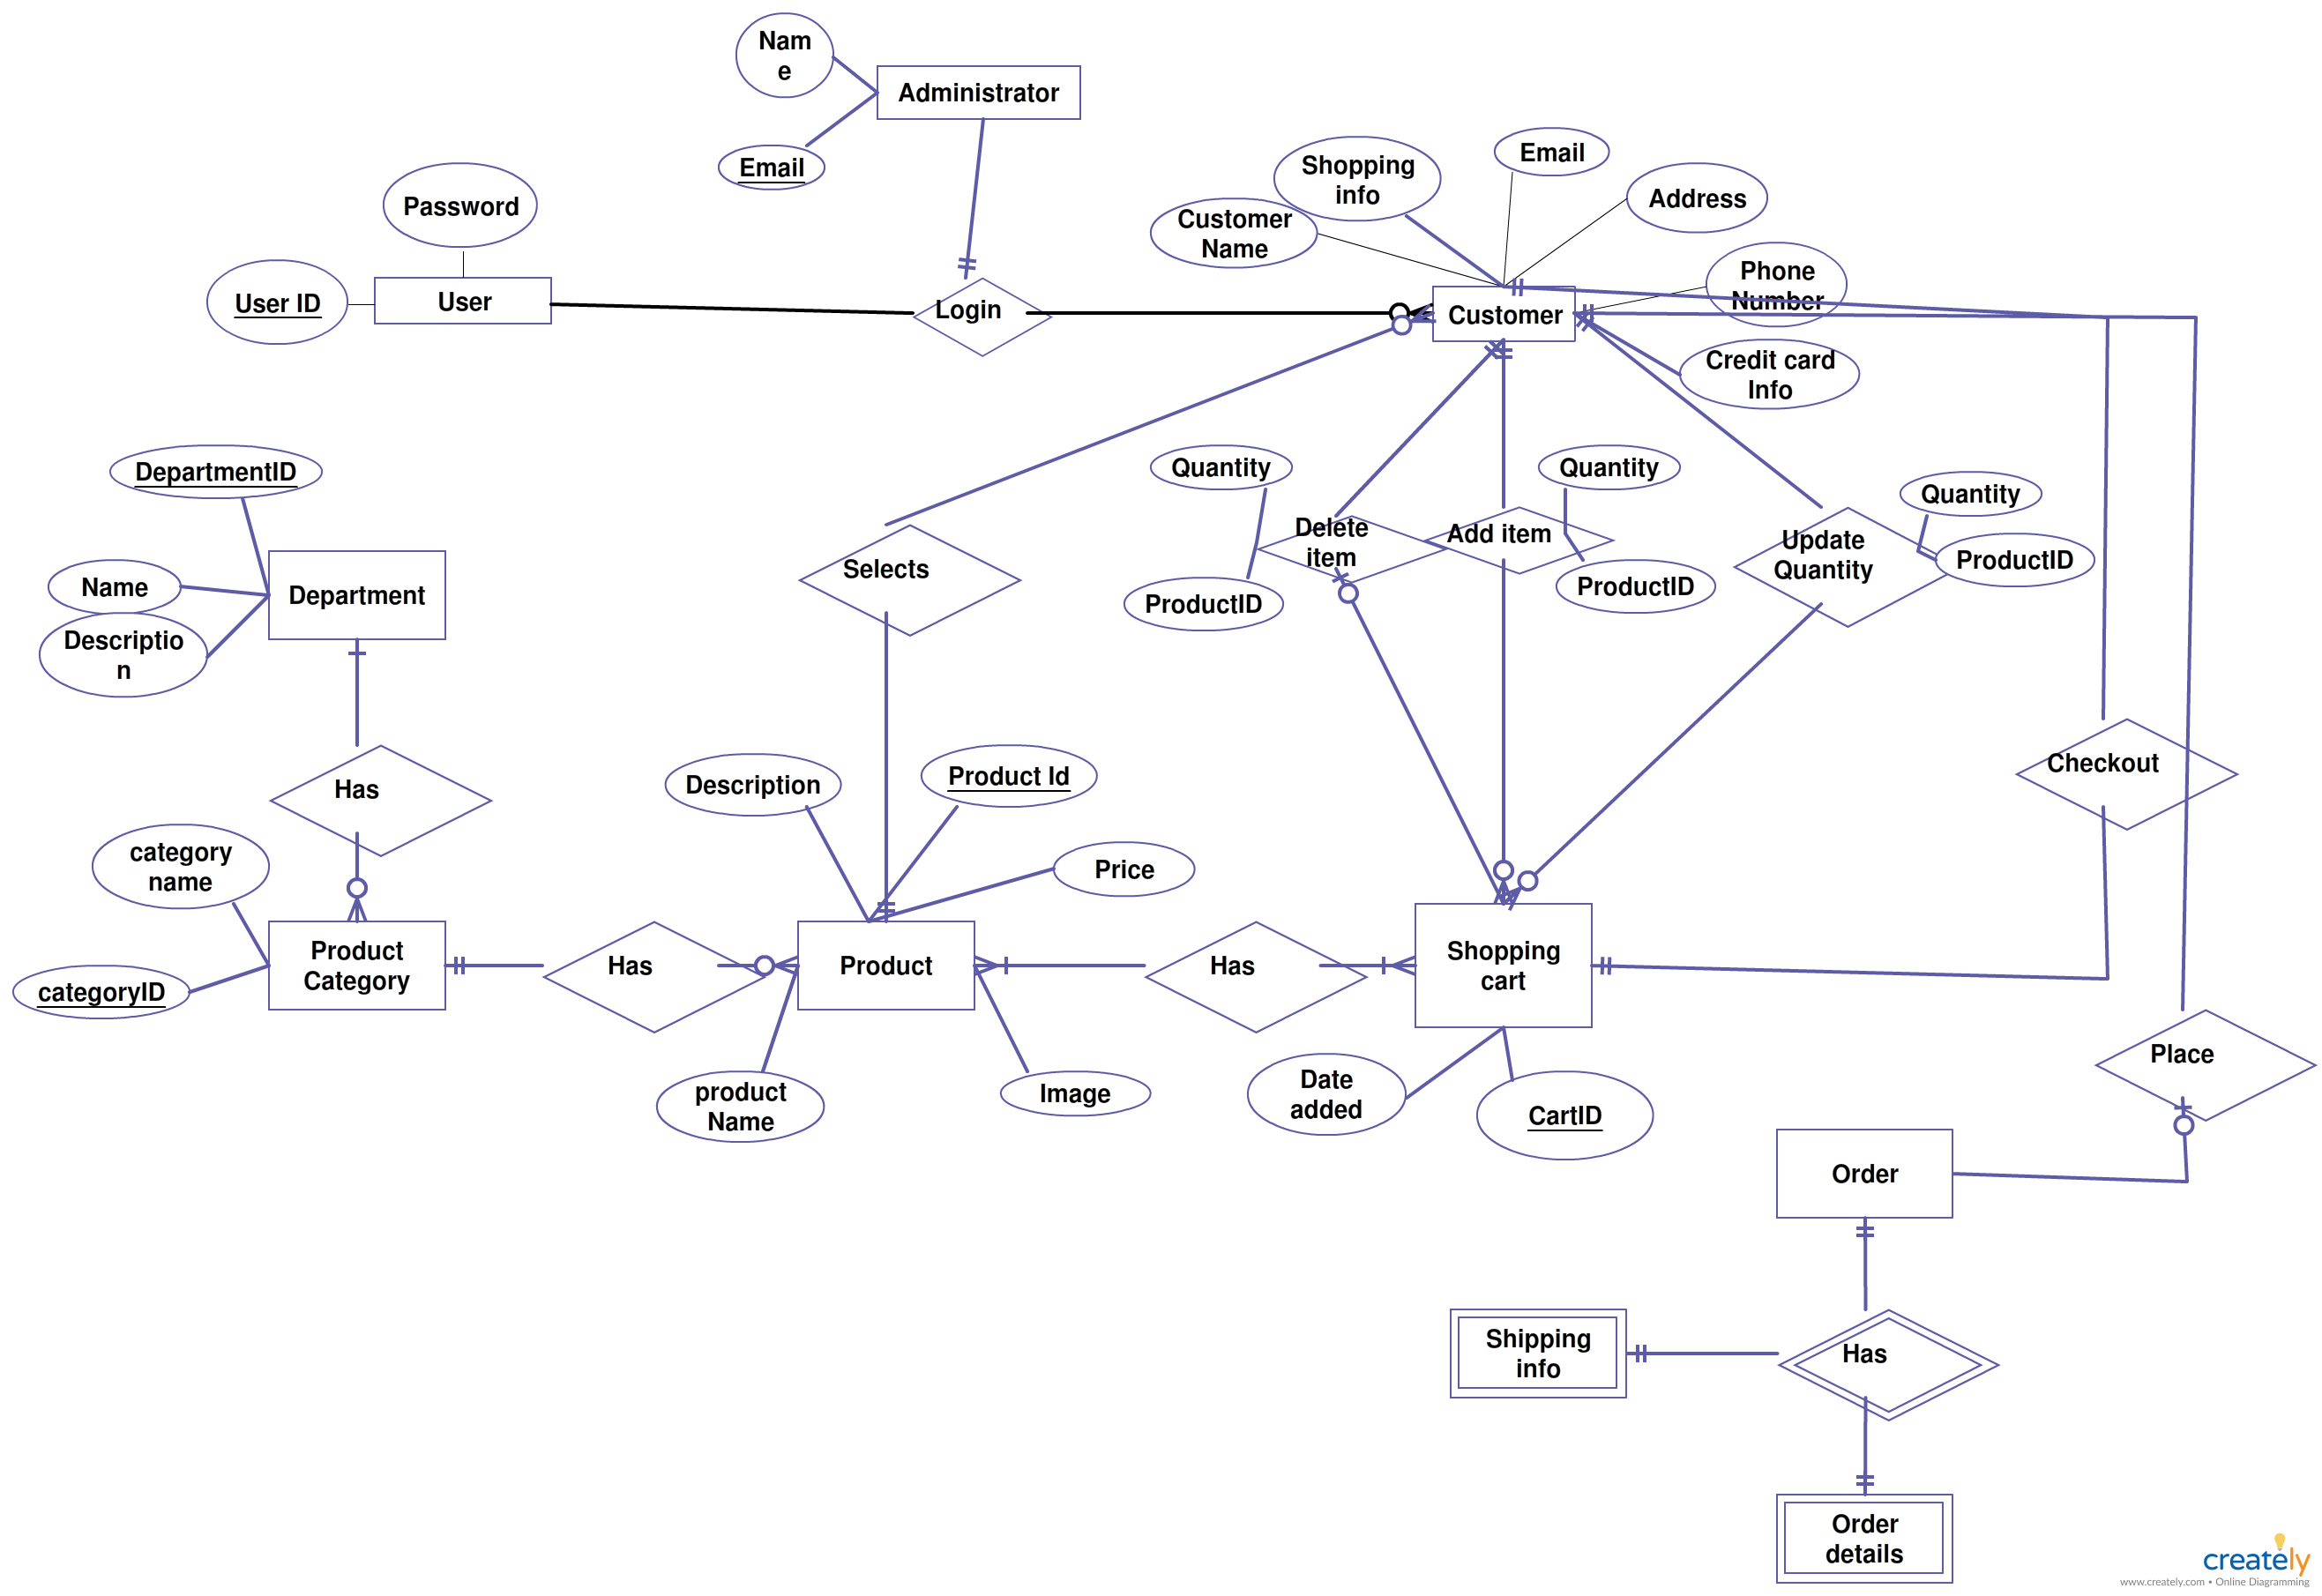 Er Diagrams Help Us To Visualize How Data Is Connected In A General pertaining to Complex Er Diagram Examples